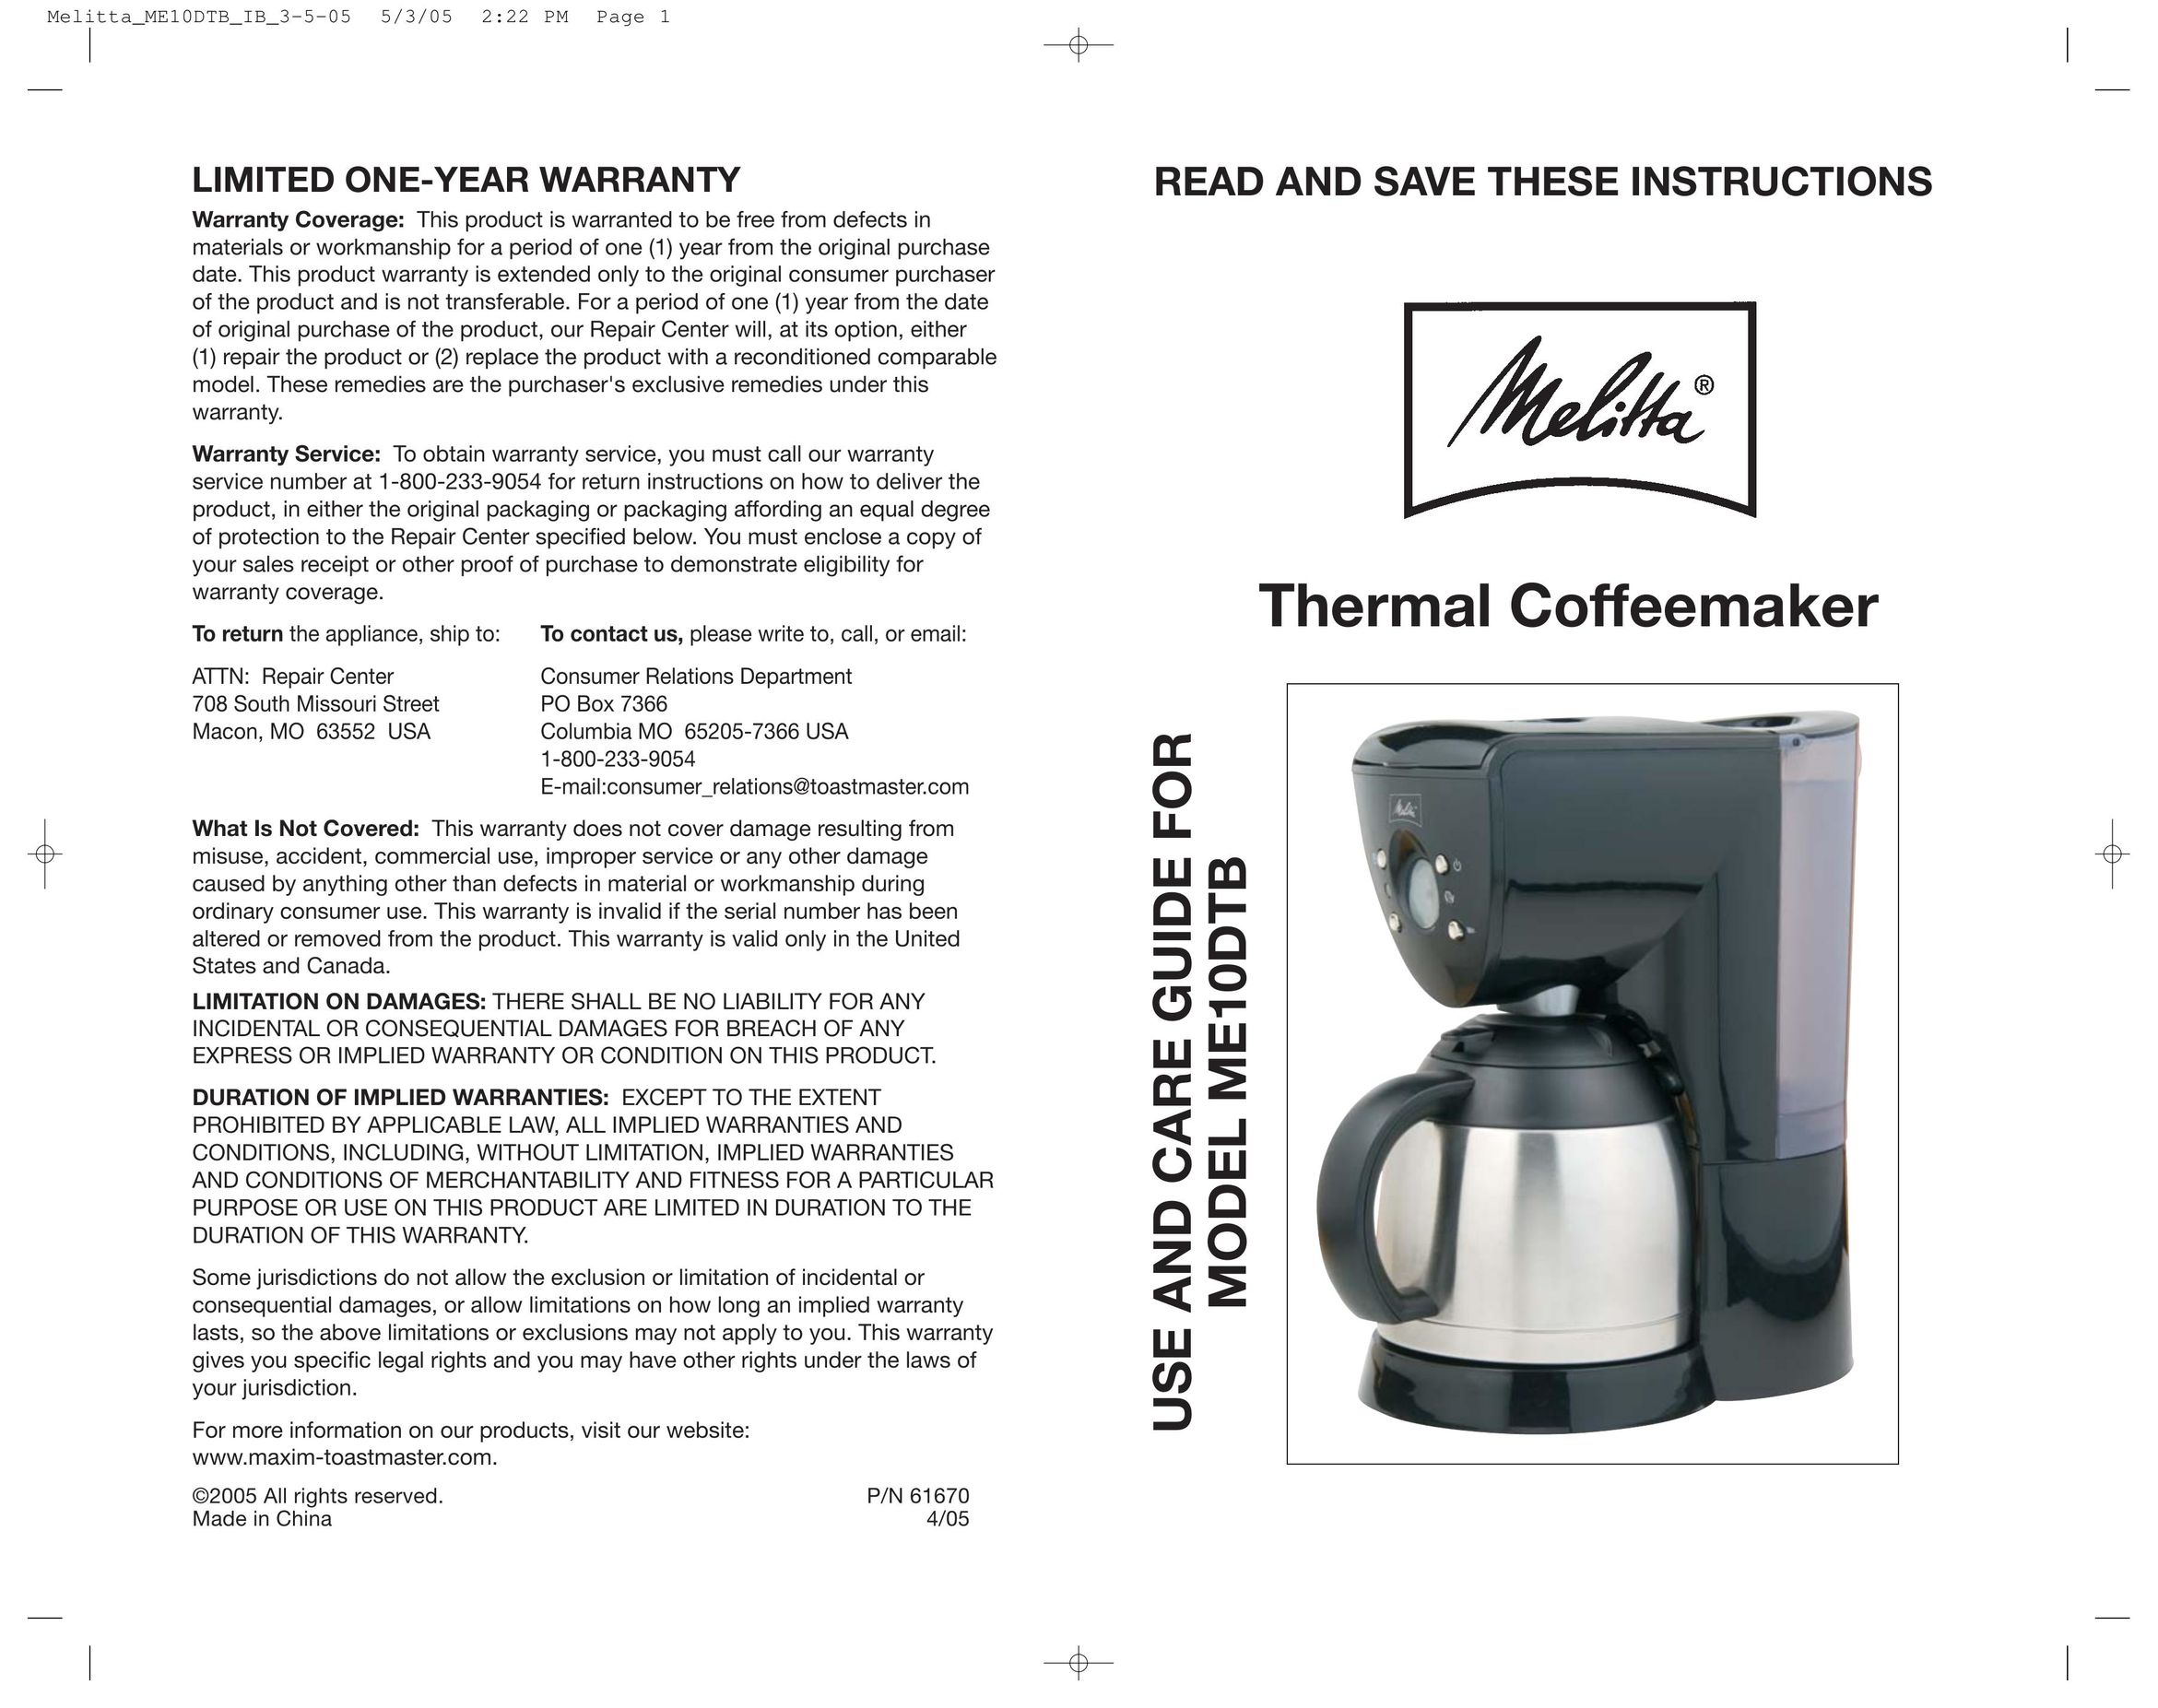 Toastmaster ME10DTB Coffeemaker User Manual